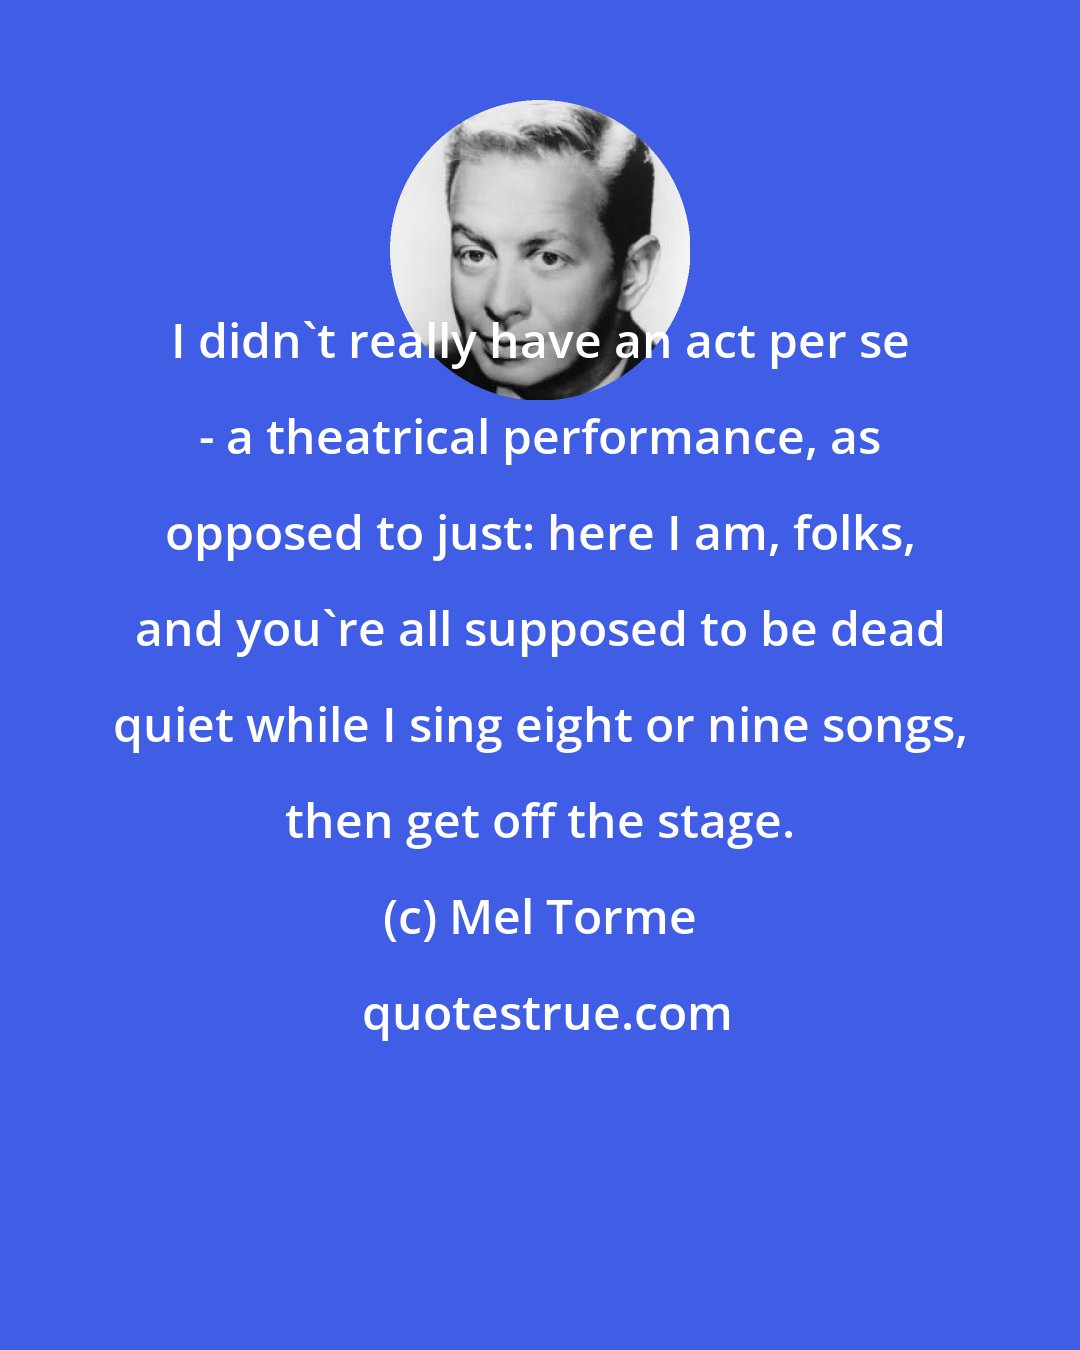 Mel Torme: I didn't really have an act per se - a theatrical performance, as opposed to just: here I am, folks, and you're all supposed to be dead quiet while I sing eight or nine songs, then get off the stage.